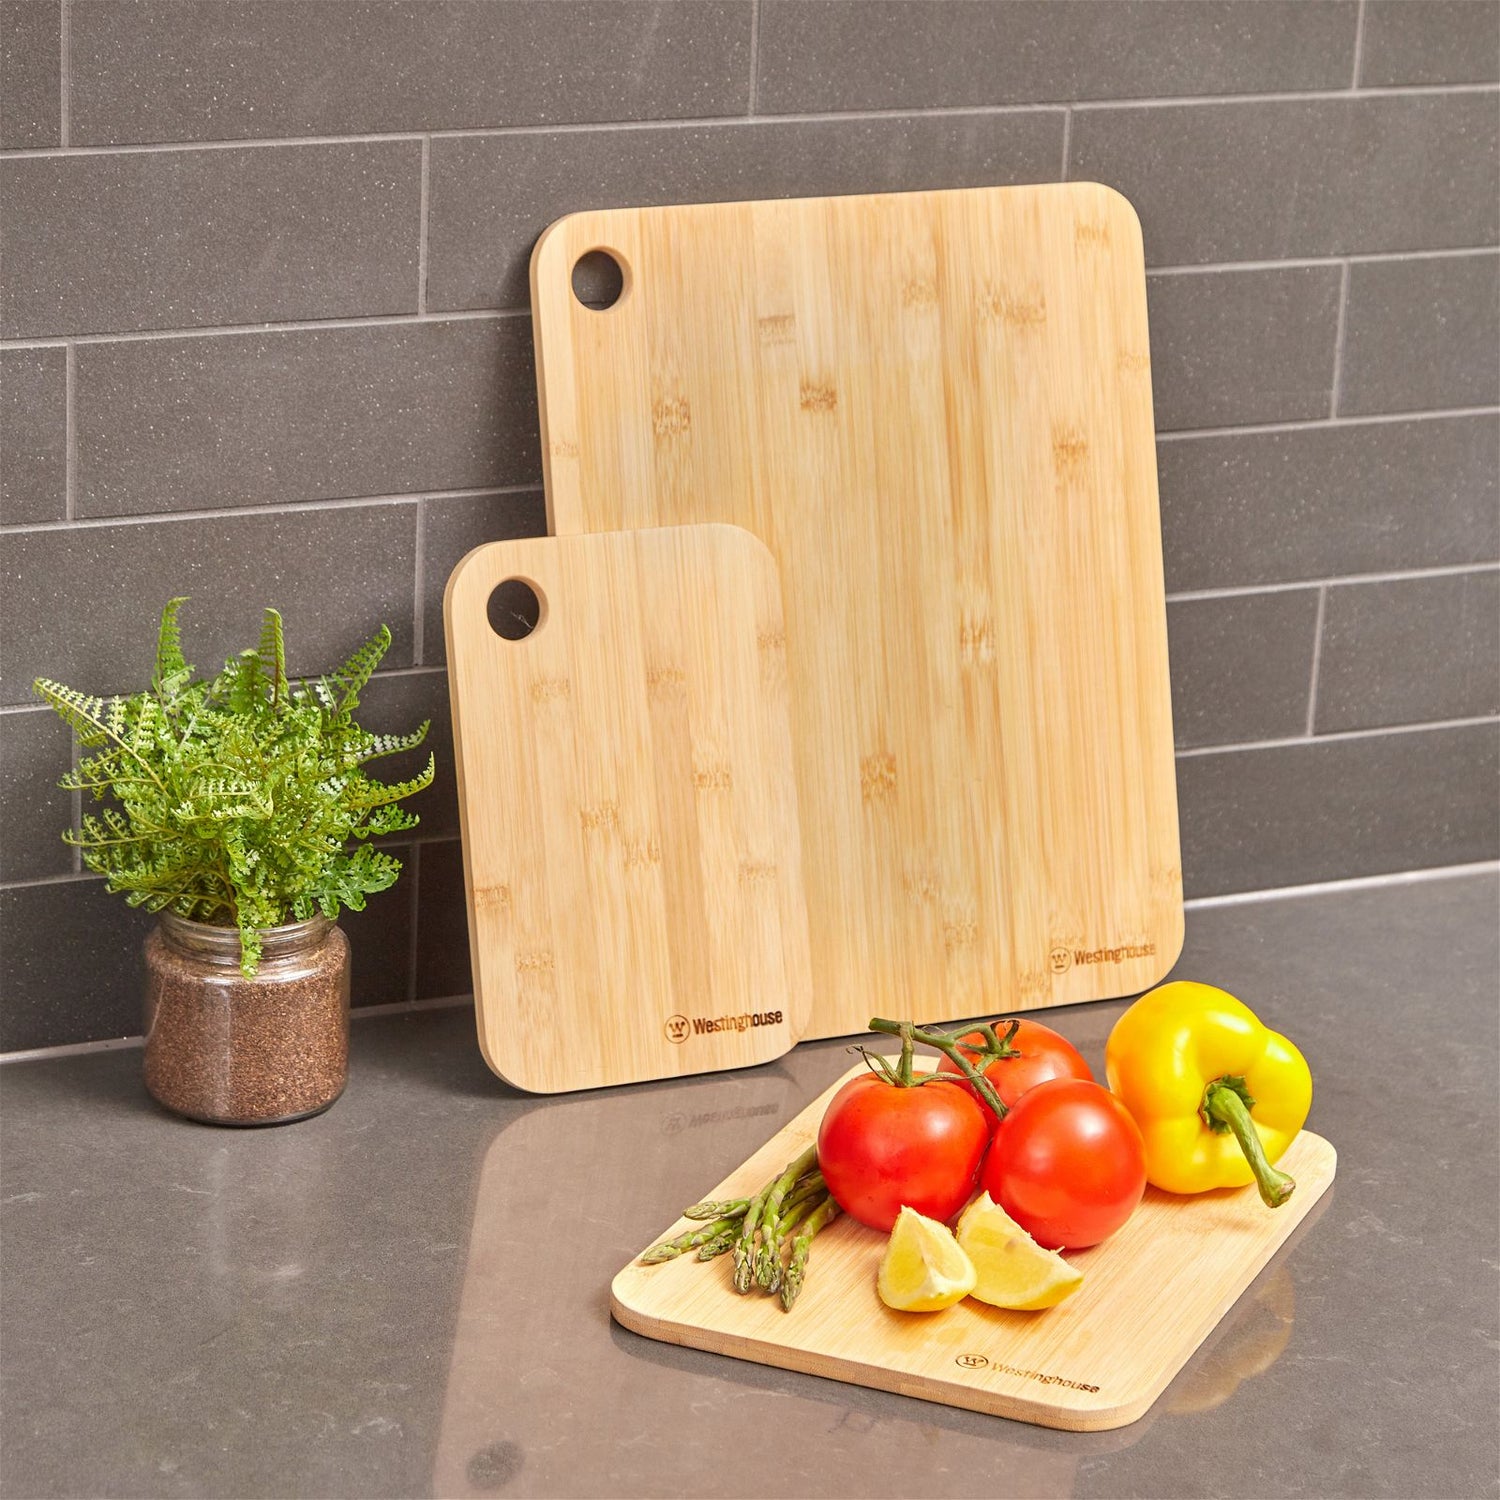 Westinghouse Chopping Board Set 3 Piece Bamboo-#product_category#- Distributed by: RVM under license